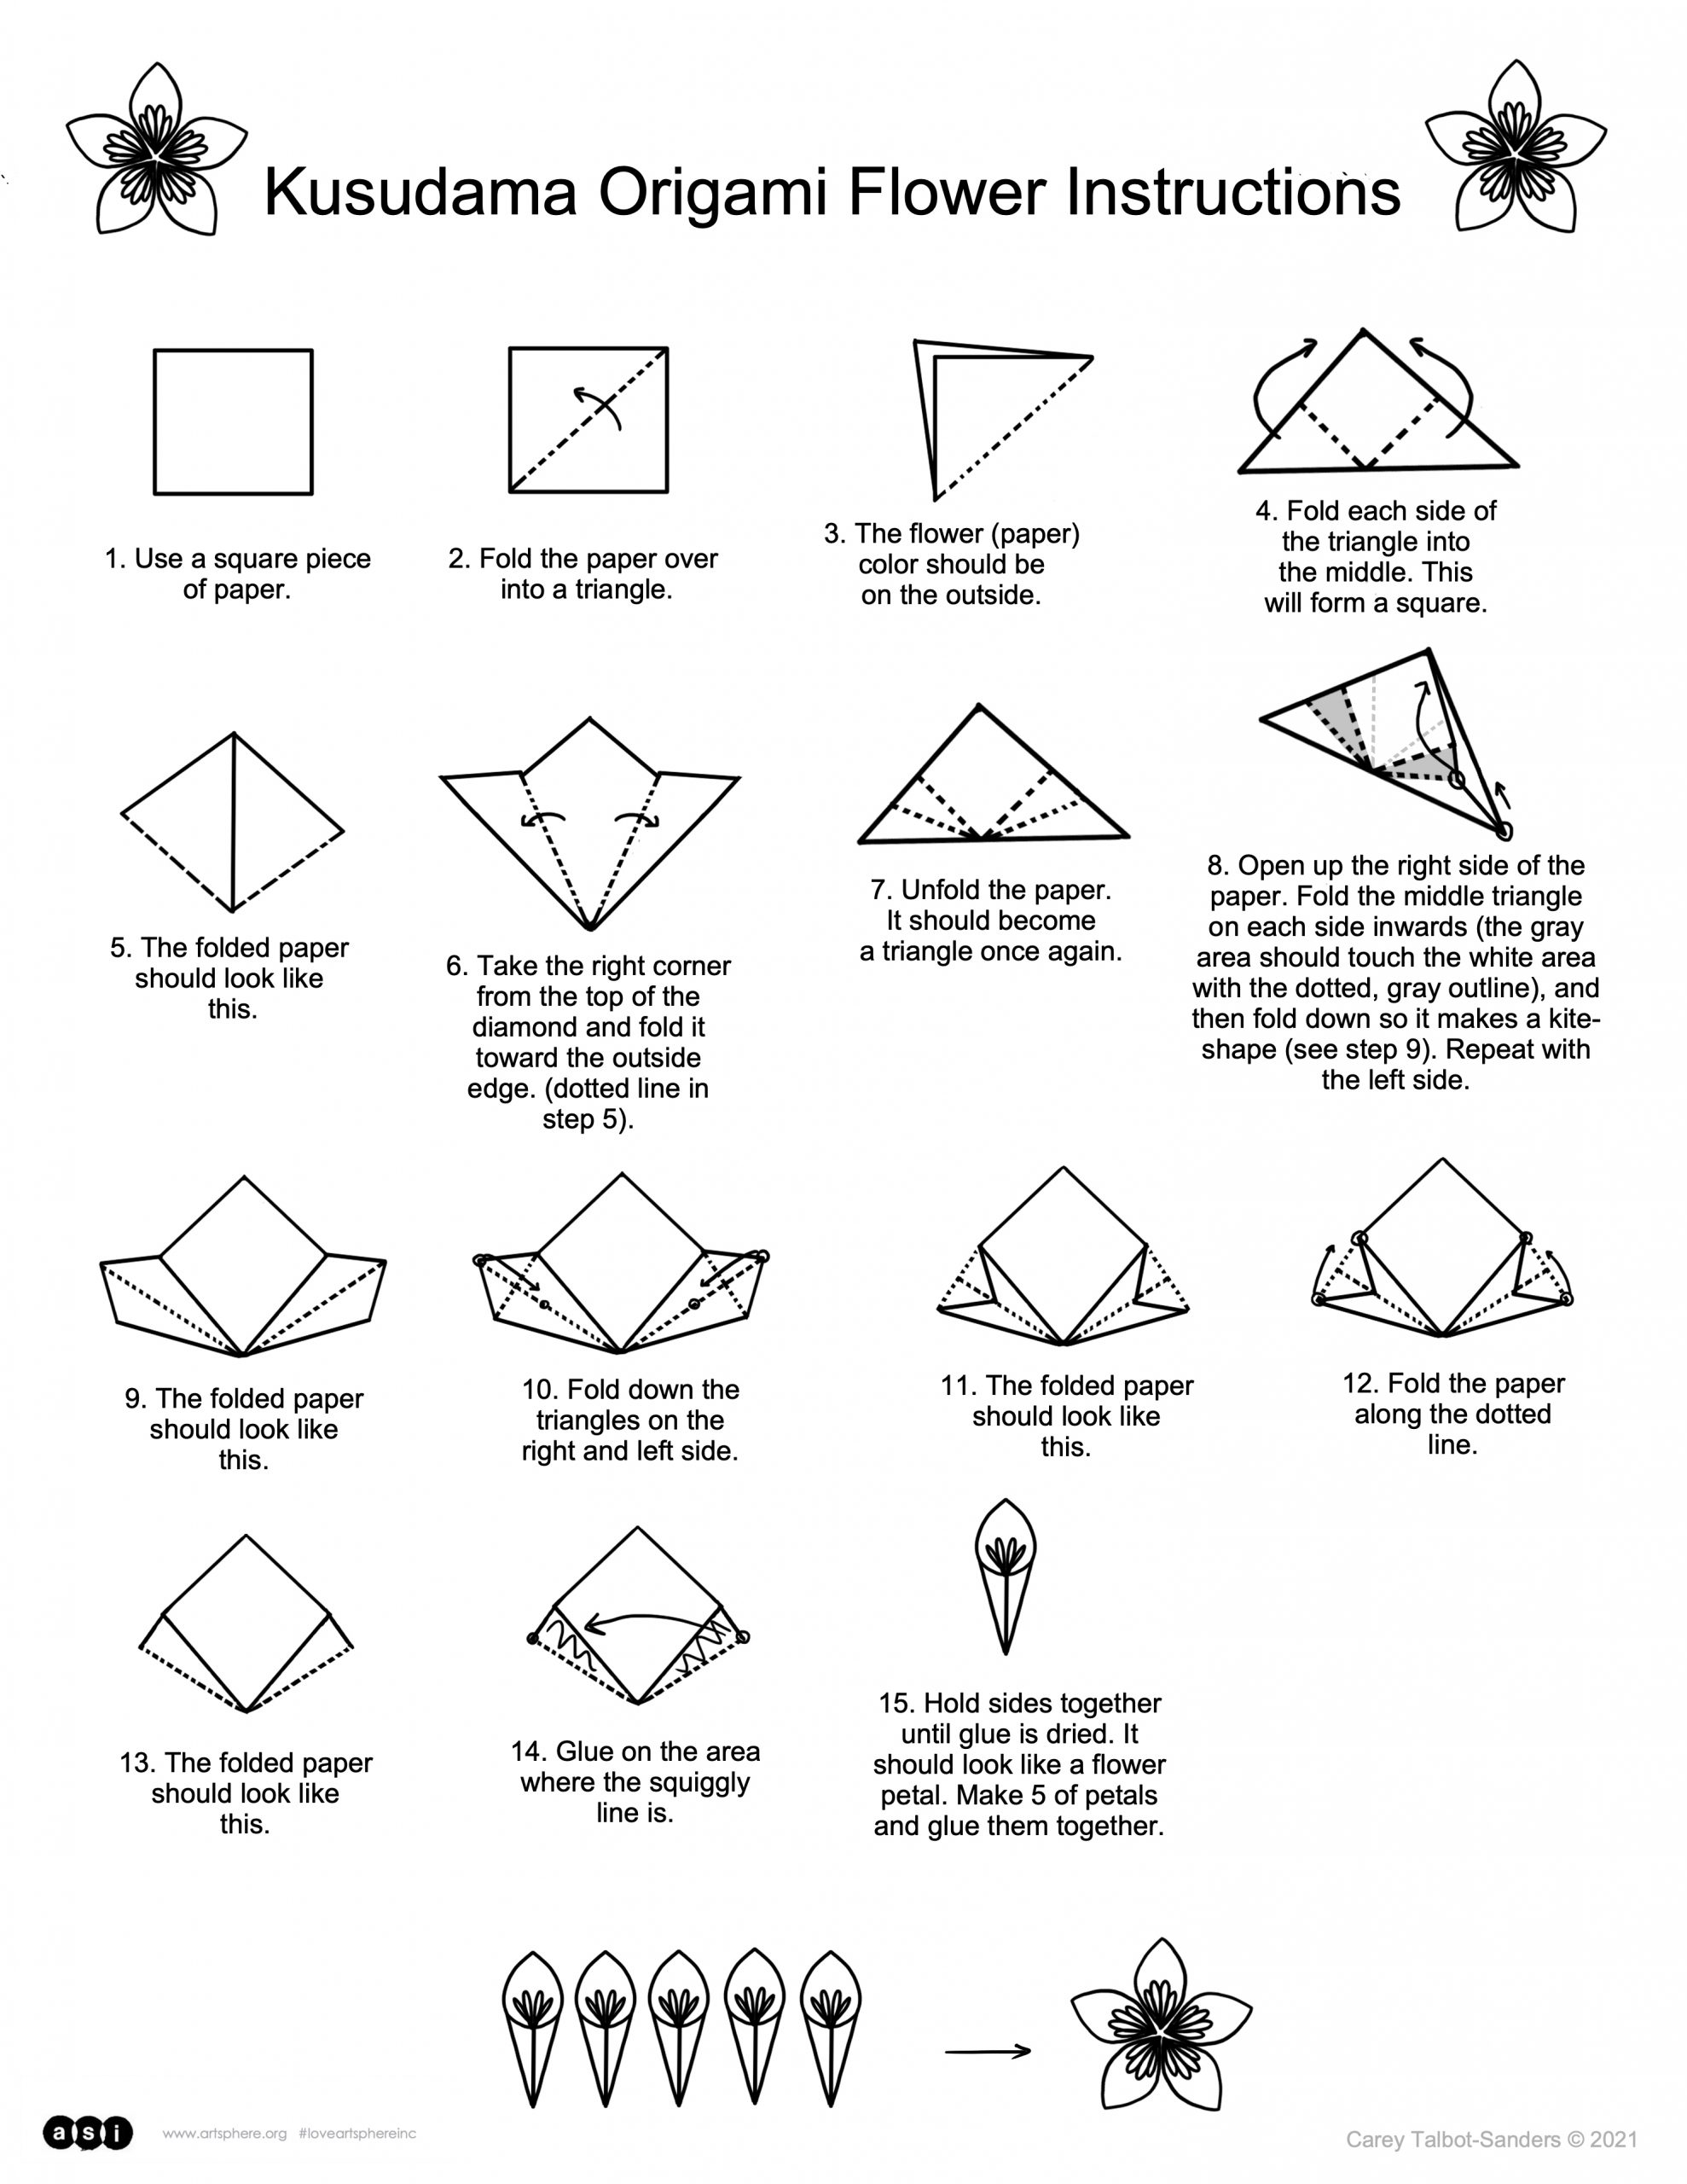 How to buy a good book about origami for kids - Kusudama Me - Origami Blog